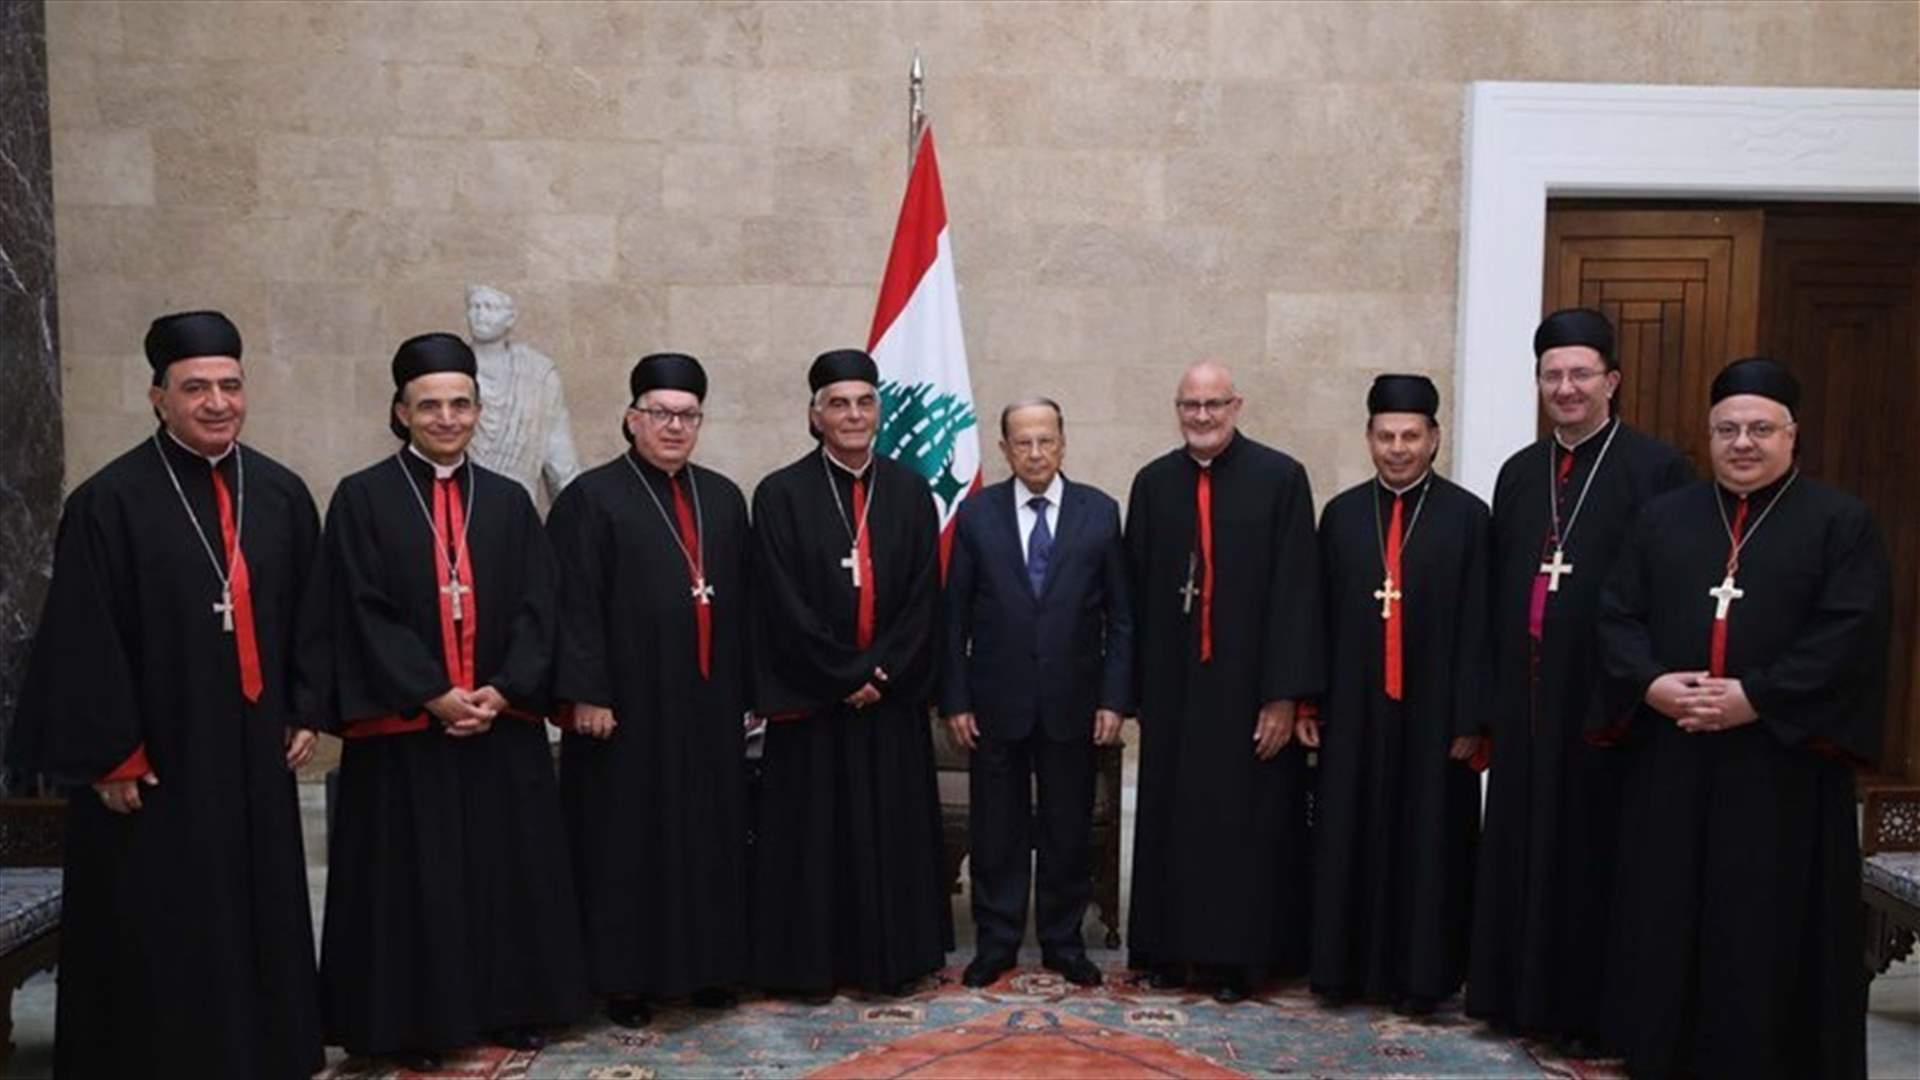 President Aoun: Lebanon has overcome a very difficult phase, needs time to rise back up